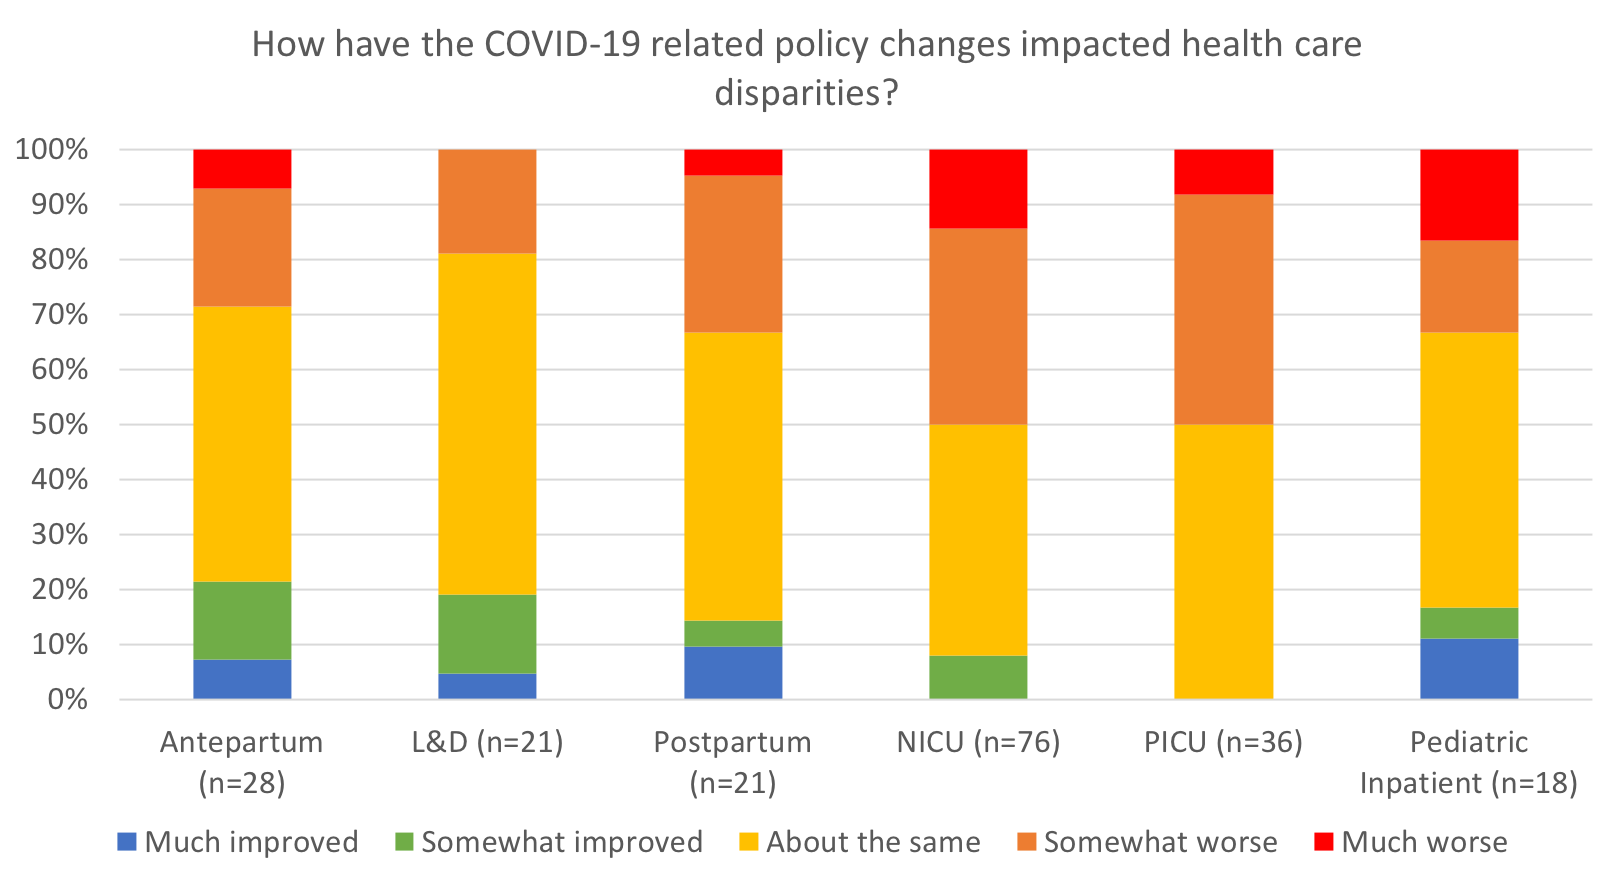 How have the COVID-19 related policy changes impacted health care disparities?